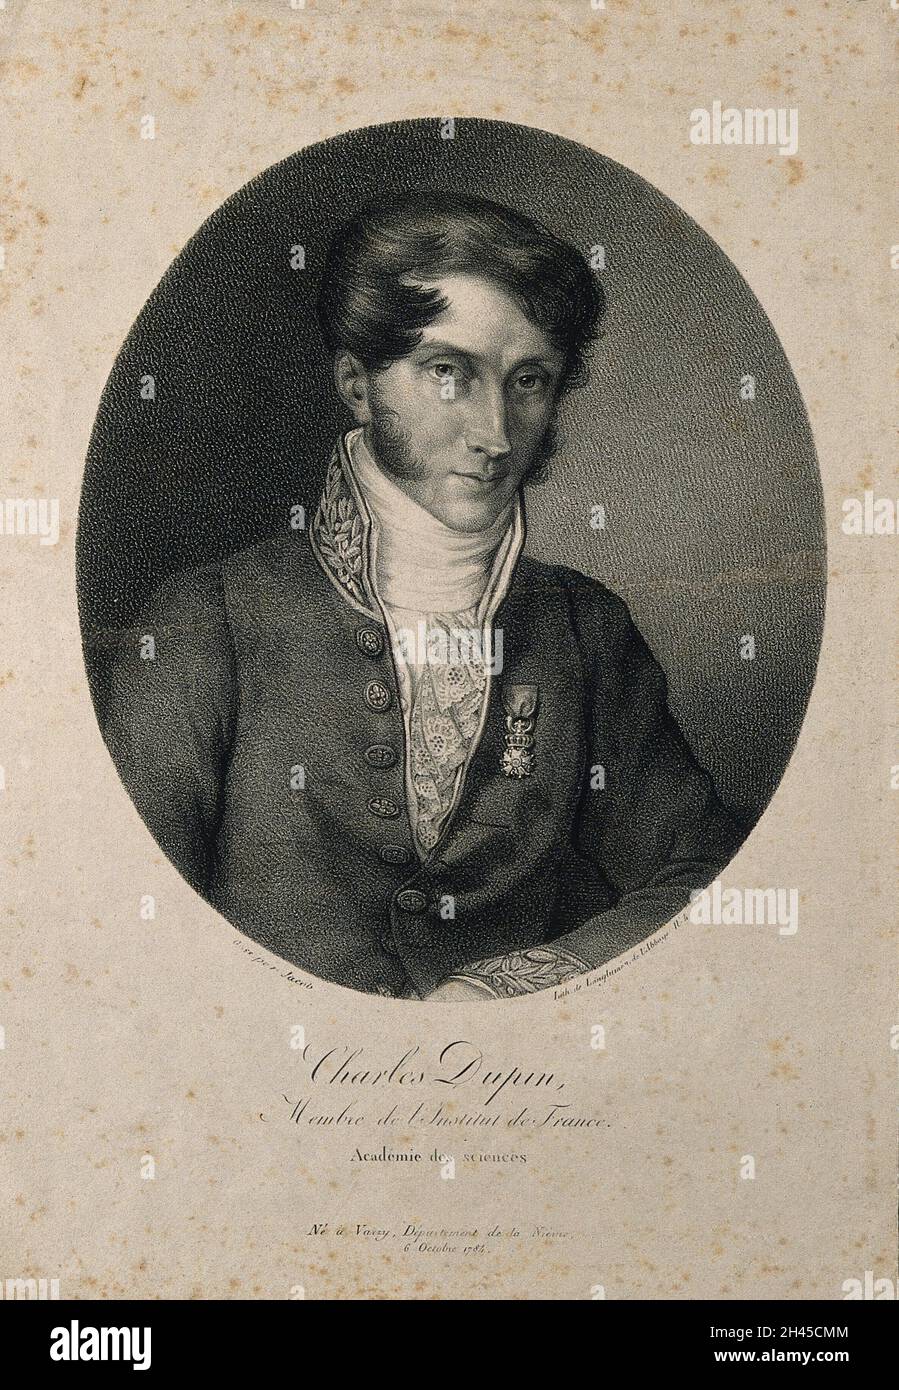 Charles, Baron Dupin. Lithograph by Langlumé after N.H. Jacob. Stock Photo